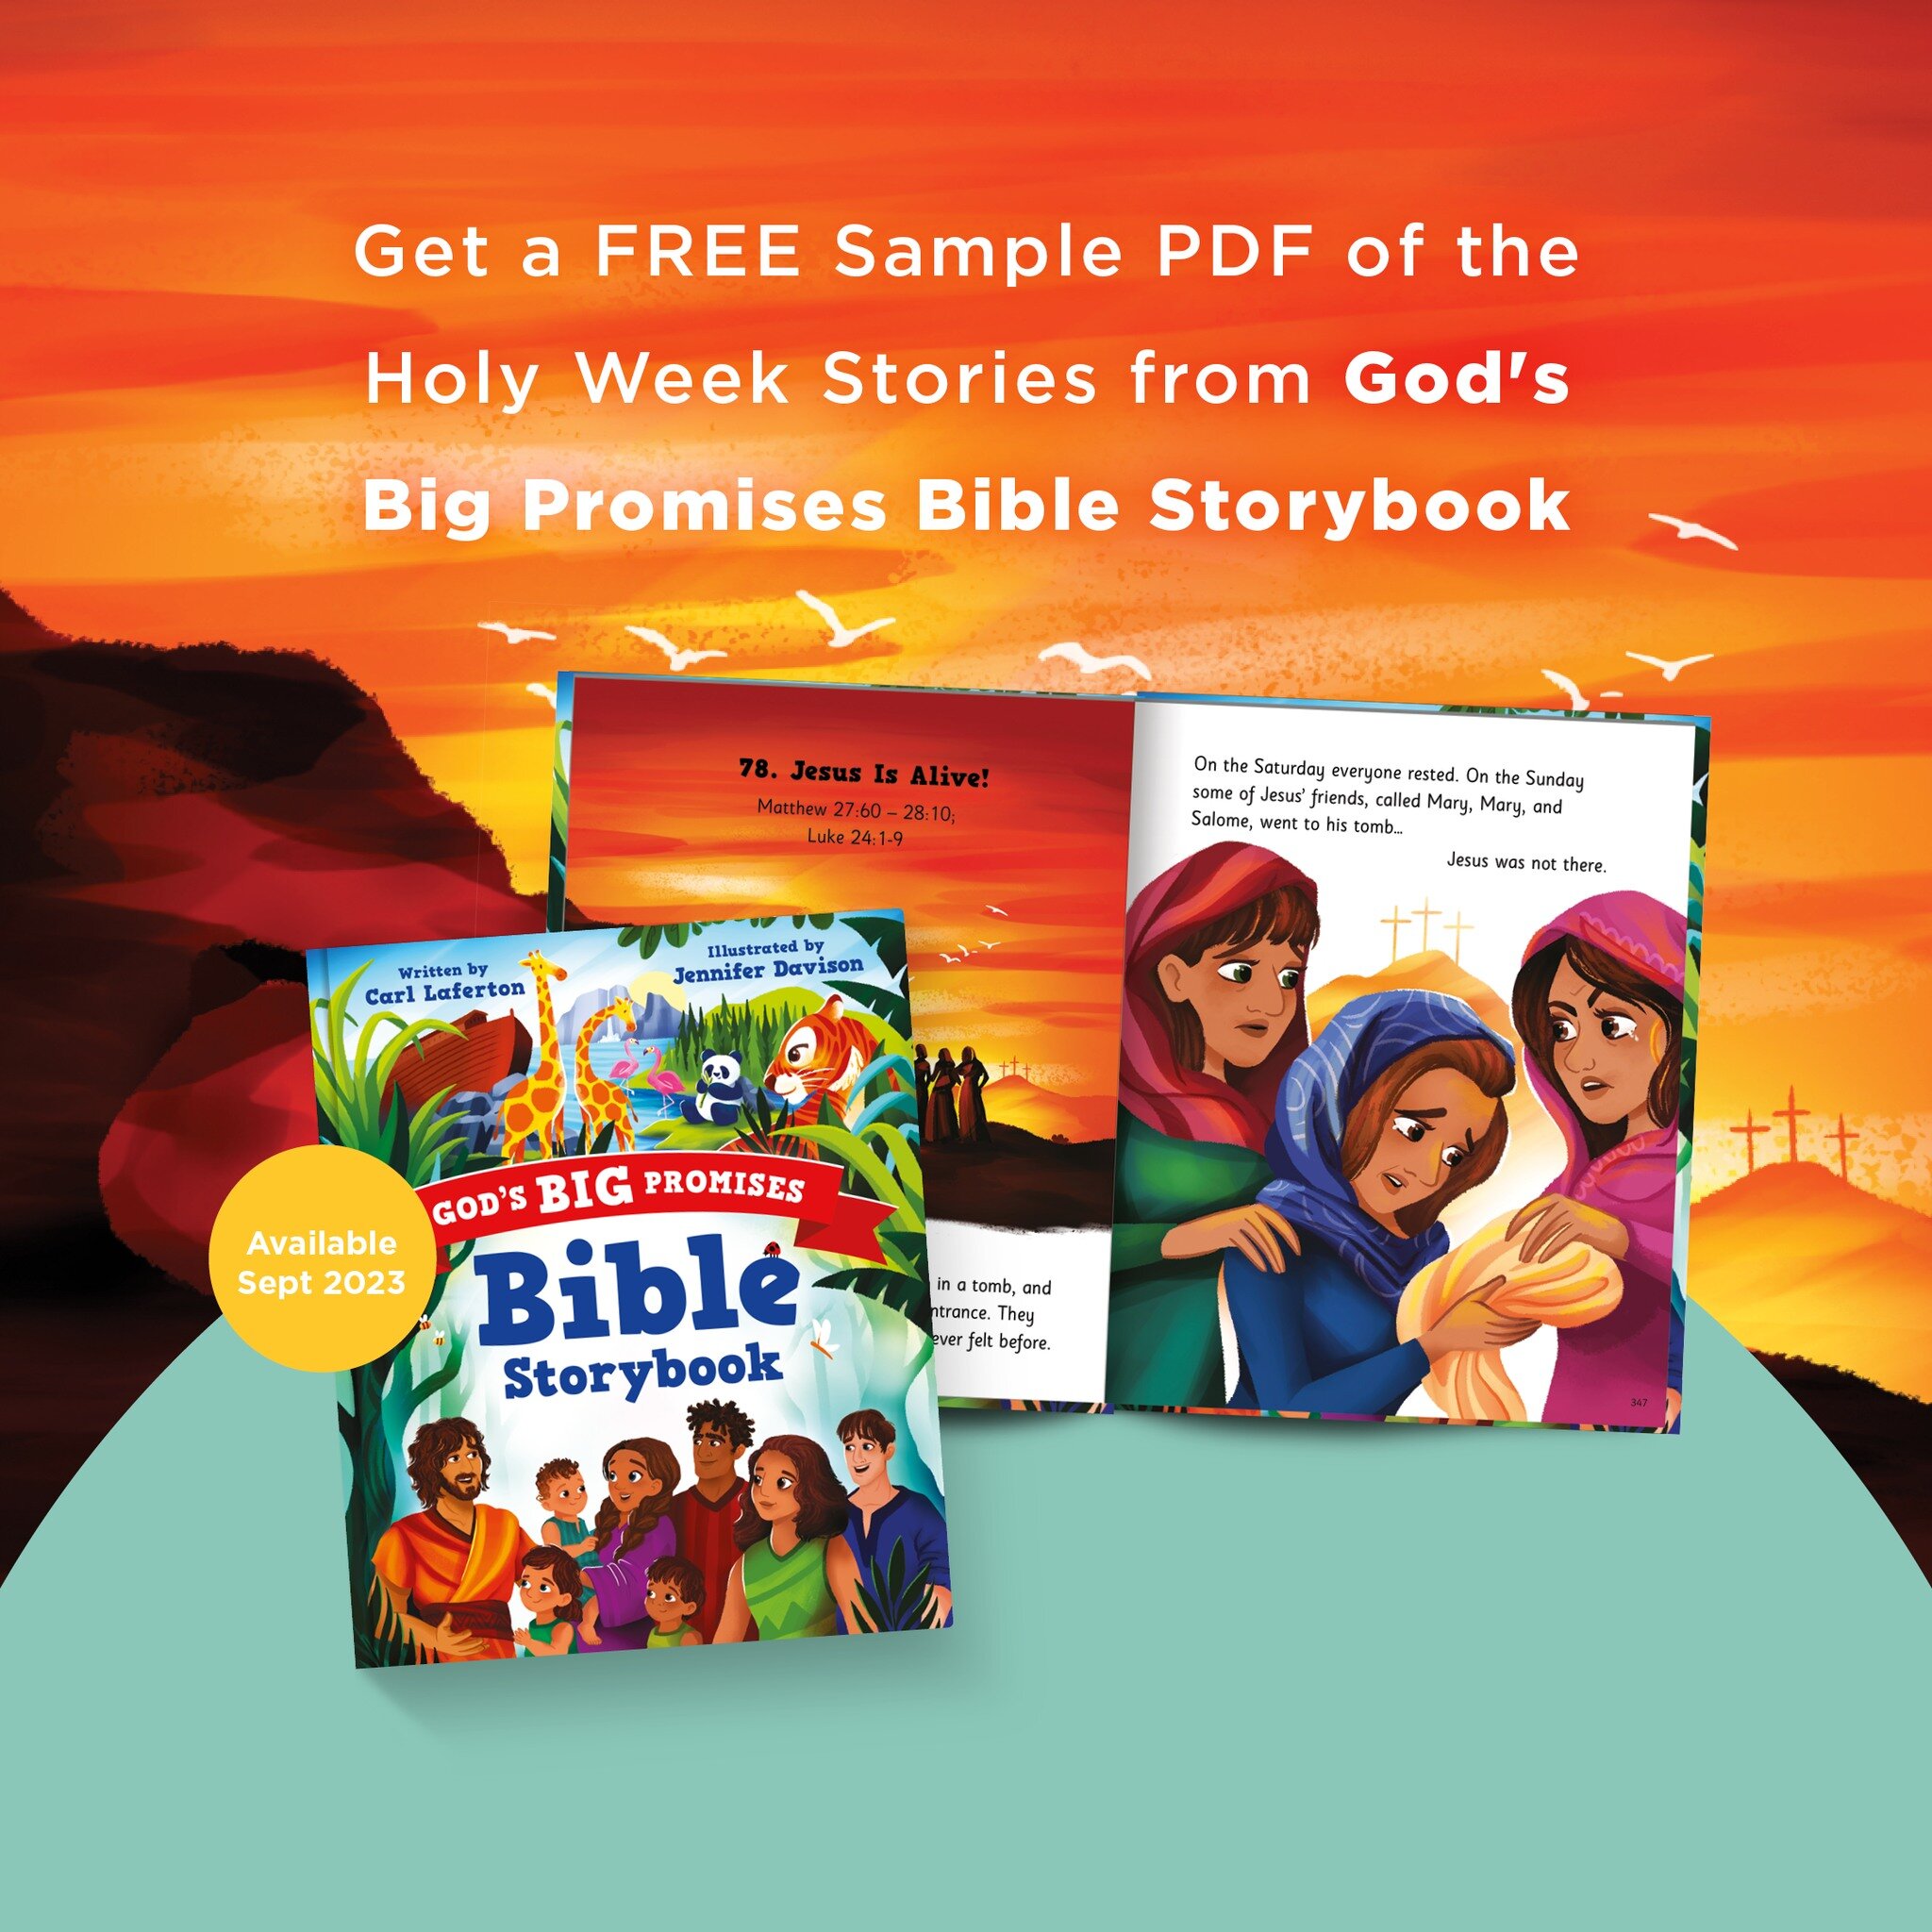 BIG NEWS.. for a limited time you can get a sneak peek inside 'God's Big Promises Bible Storybook'.
Follow the link in my bio to download a sample PDF of the Easter section of the Bible Storybook to use for family devotions leading up to Easter Sunda